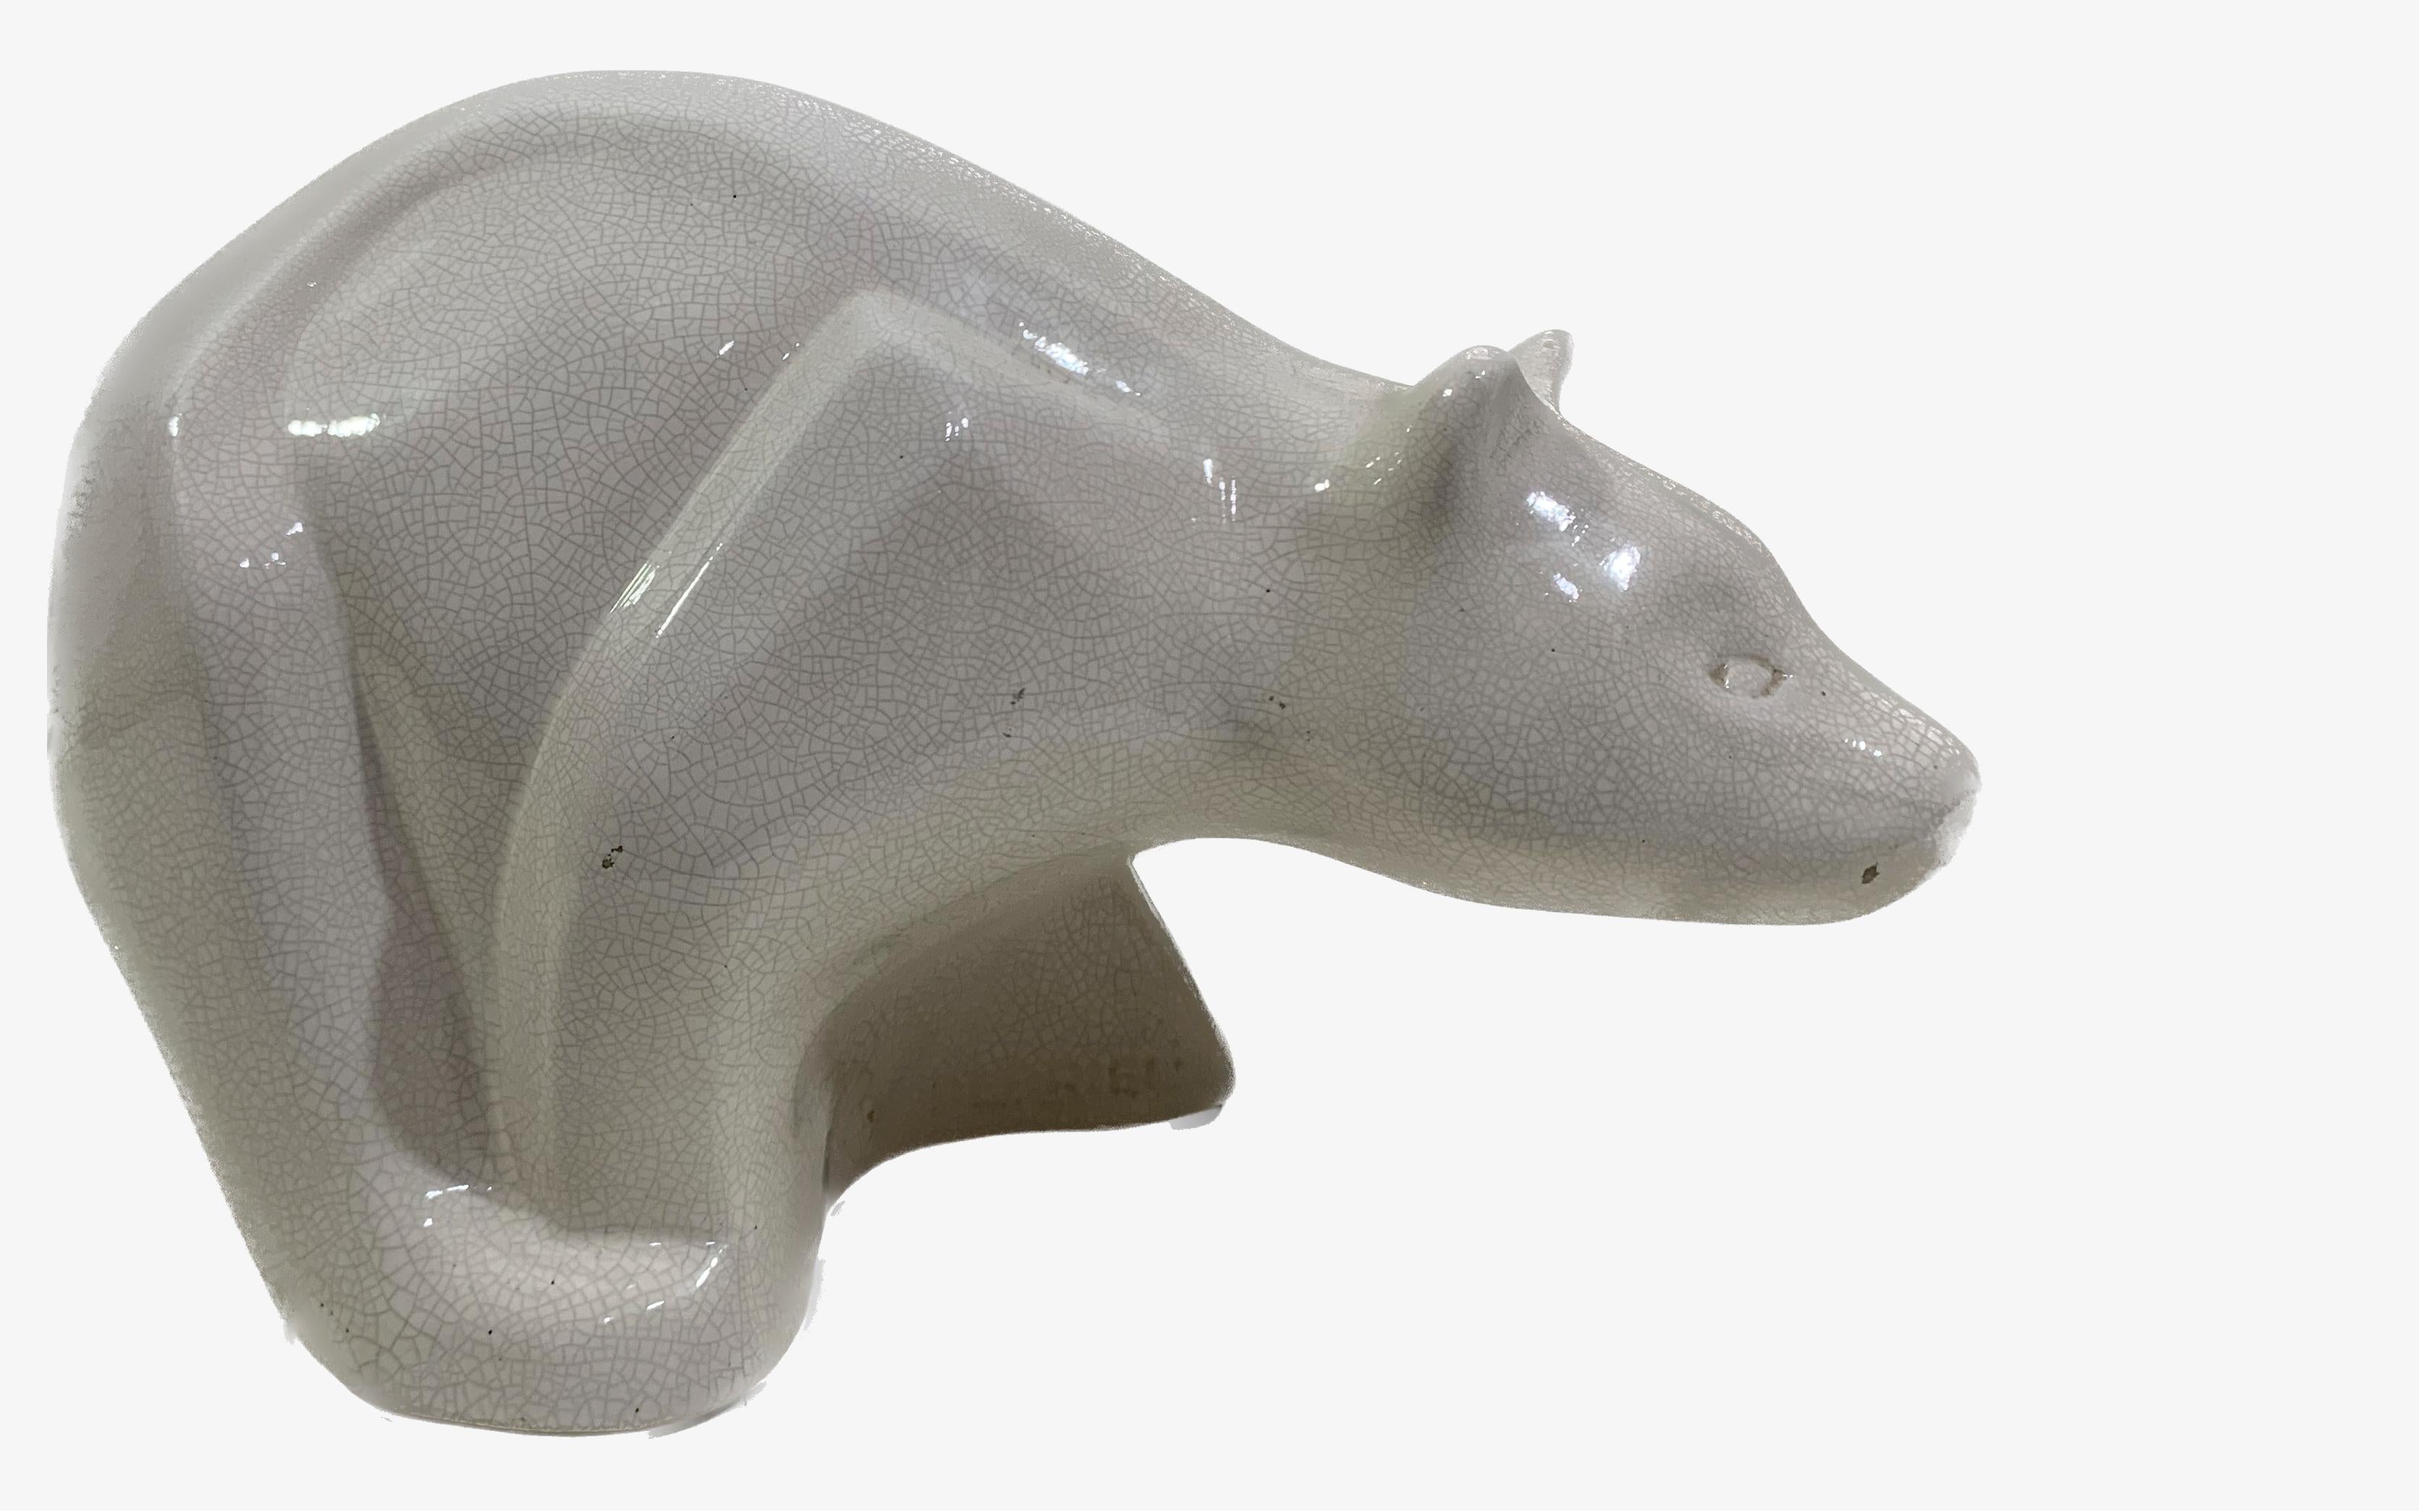 Bear sculpture in white enameled and crackled ceramic, representing a bear signed at the lower part Debrieu.
A beautiful sculpture and is sure to give a certain cachet as a decorative addition to any kind of setting as their design is timeless and